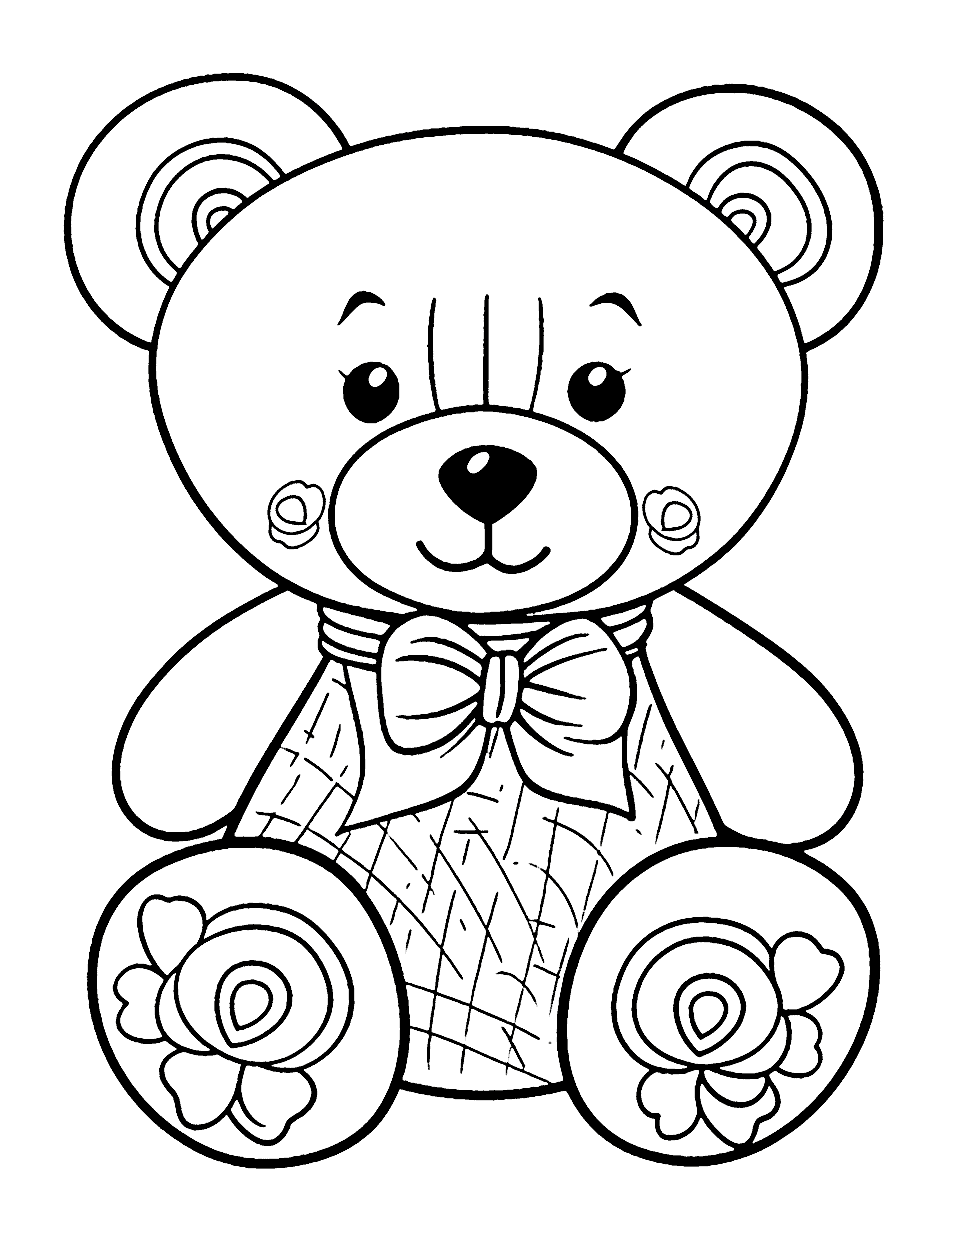 Cuddly Teddy Bear Animal Coloring Page - A cute teddy bear surrounded by flowers.